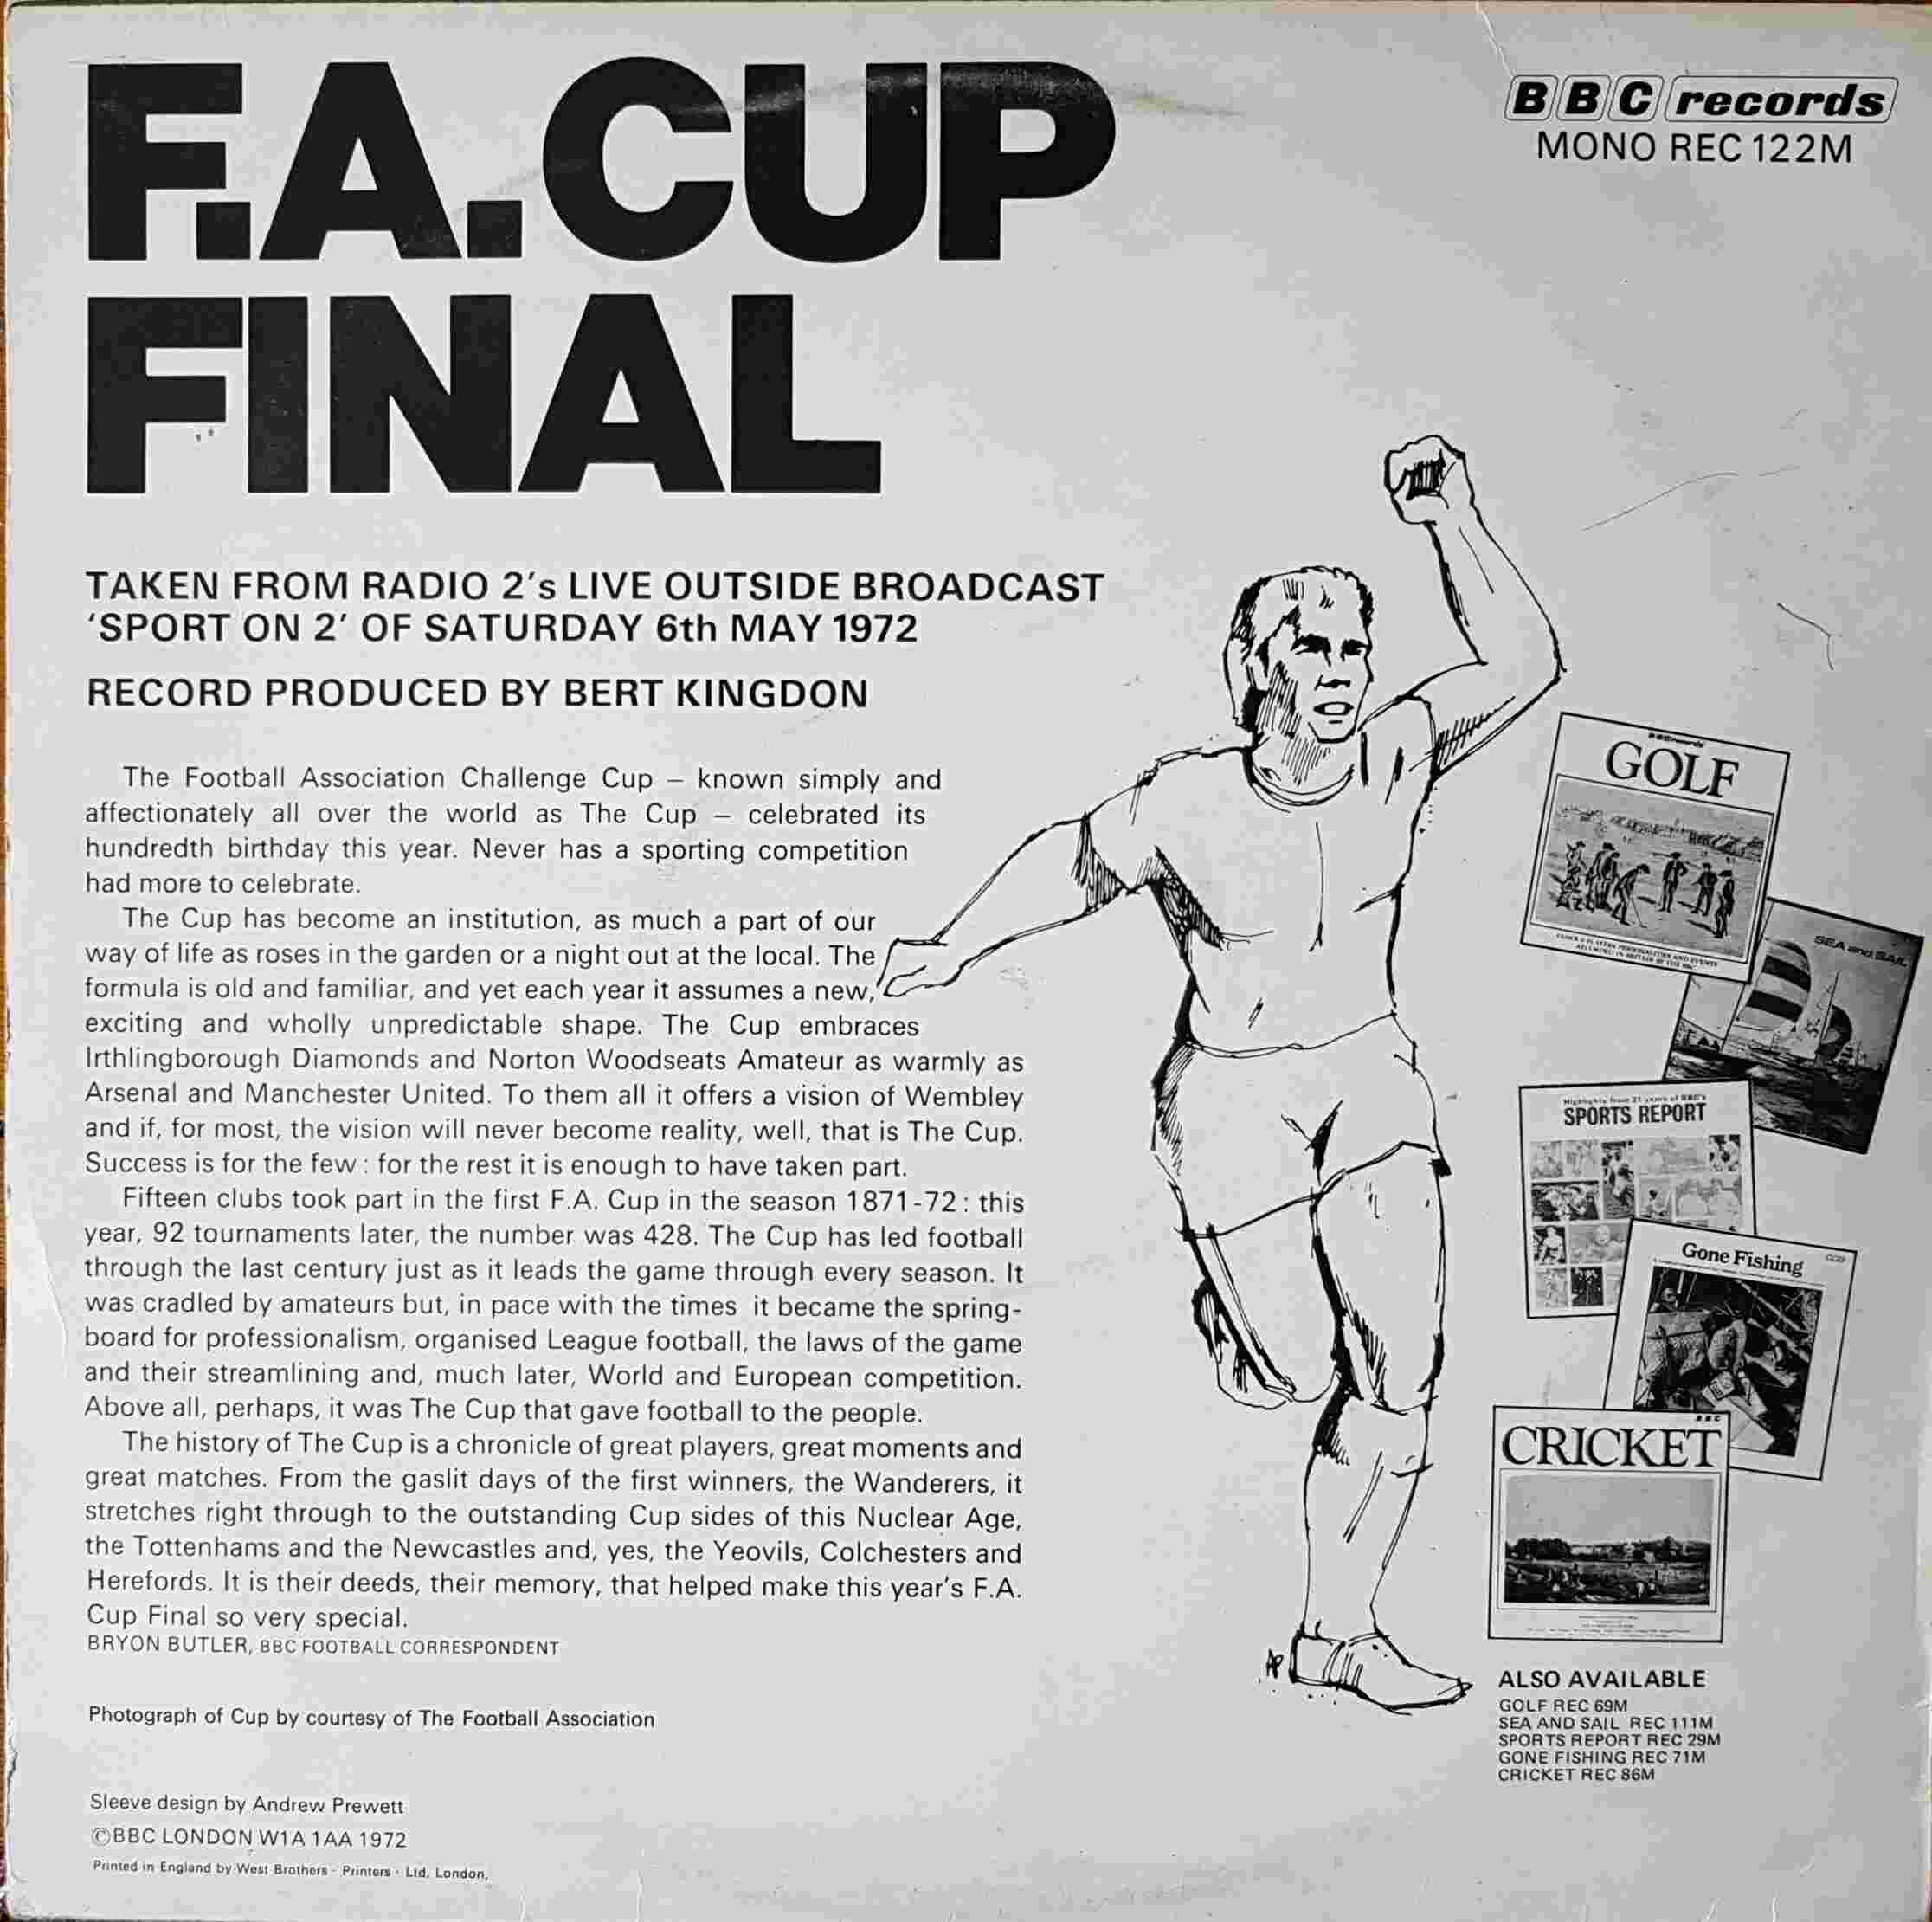 Picture of REC 122 F. A. Cup final 1972 by artist Bryon Butler from the BBC records and Tapes library